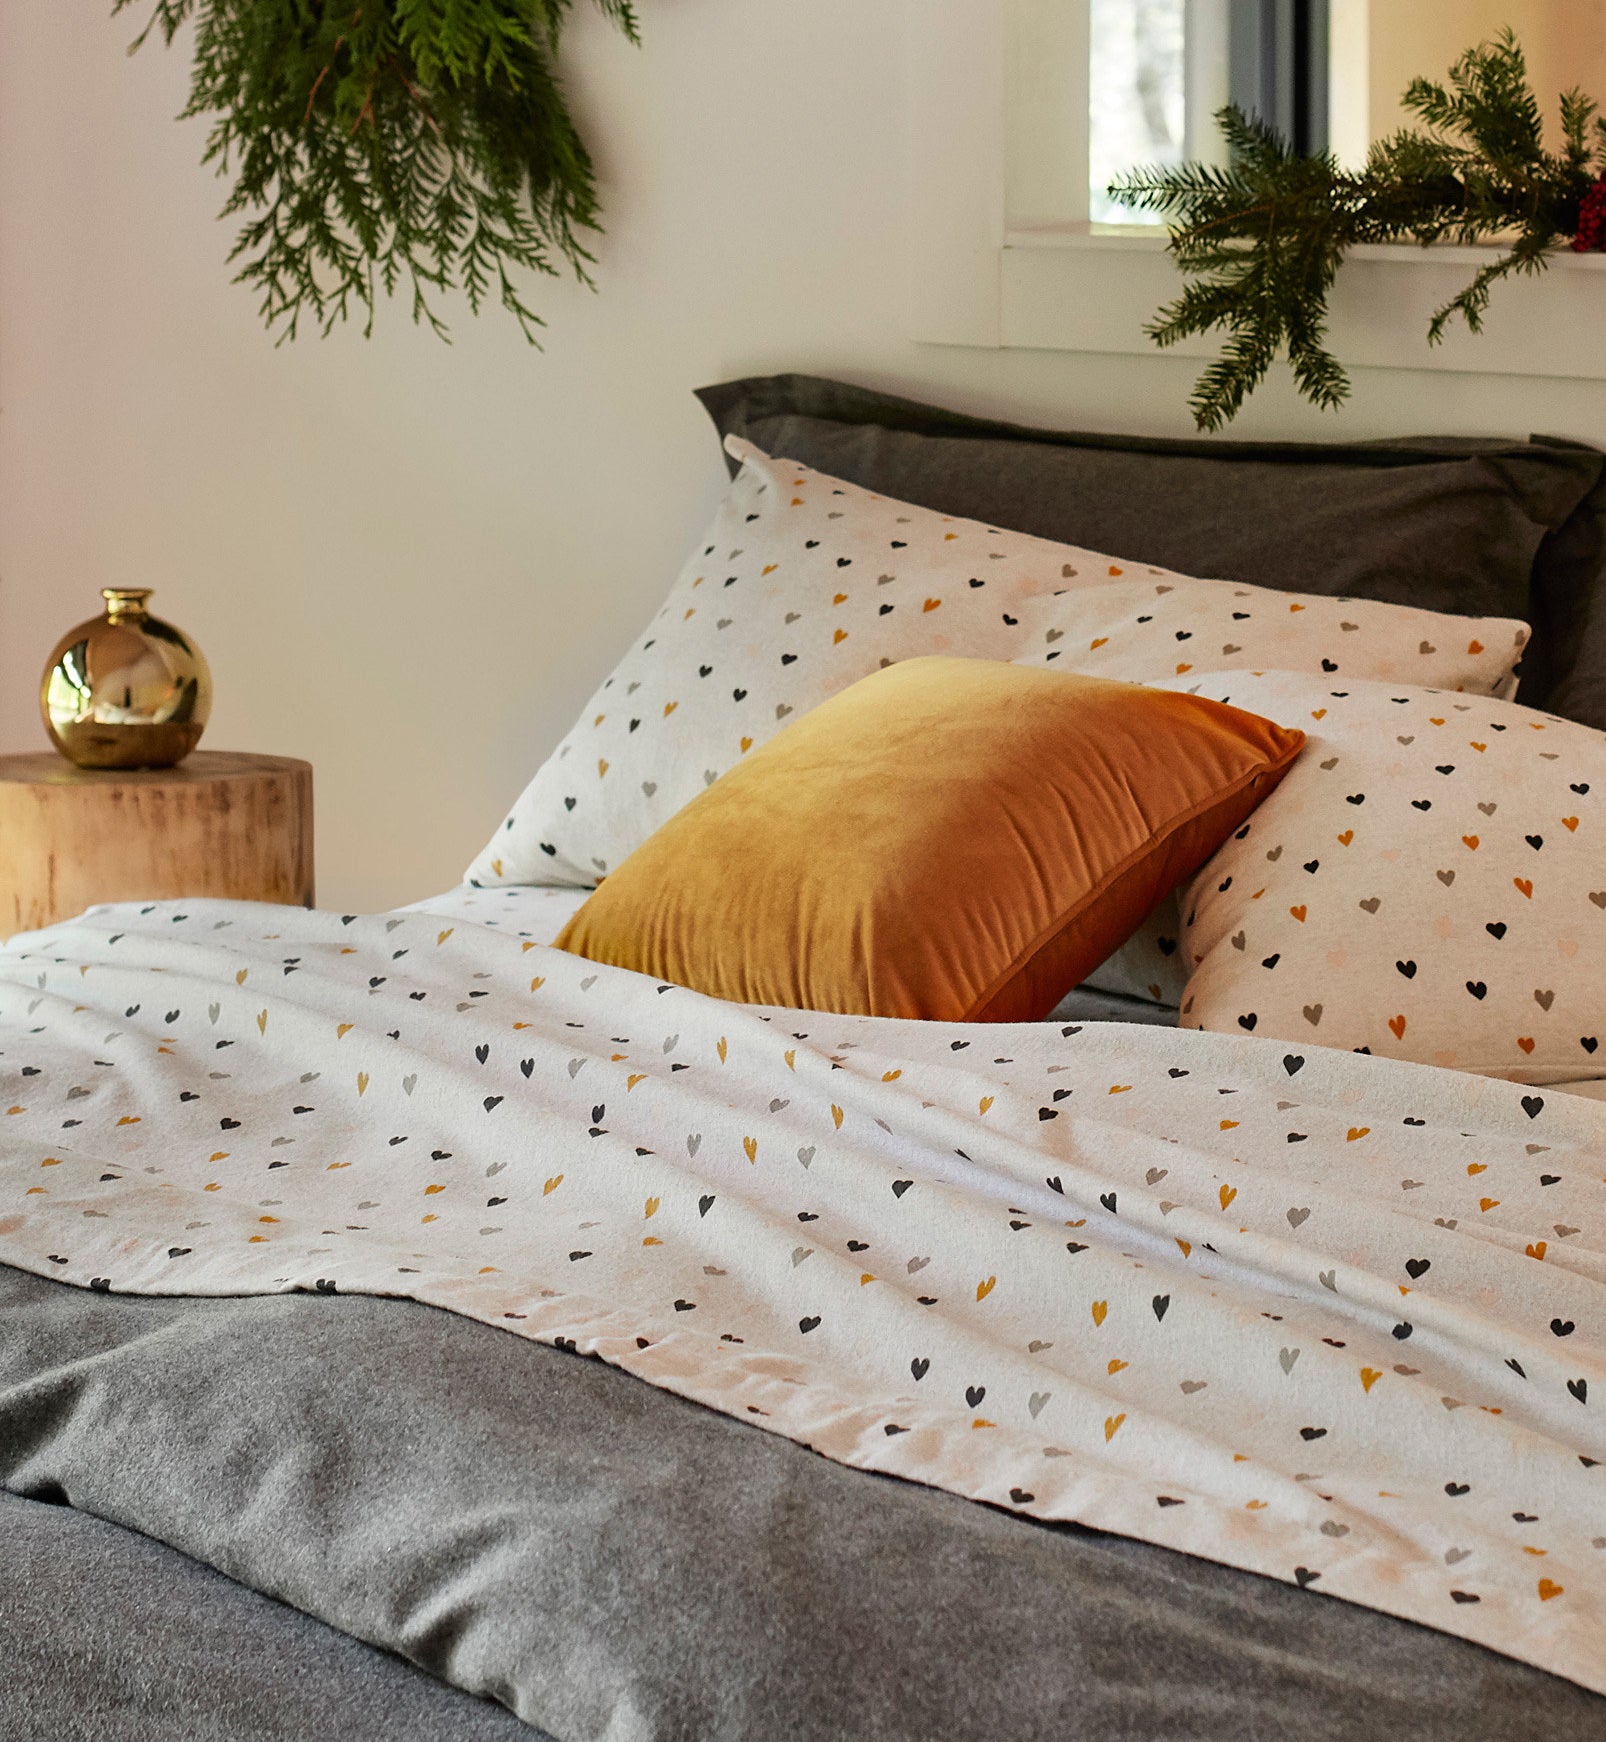 a set of soft flannel sheets on a neatly made up bed